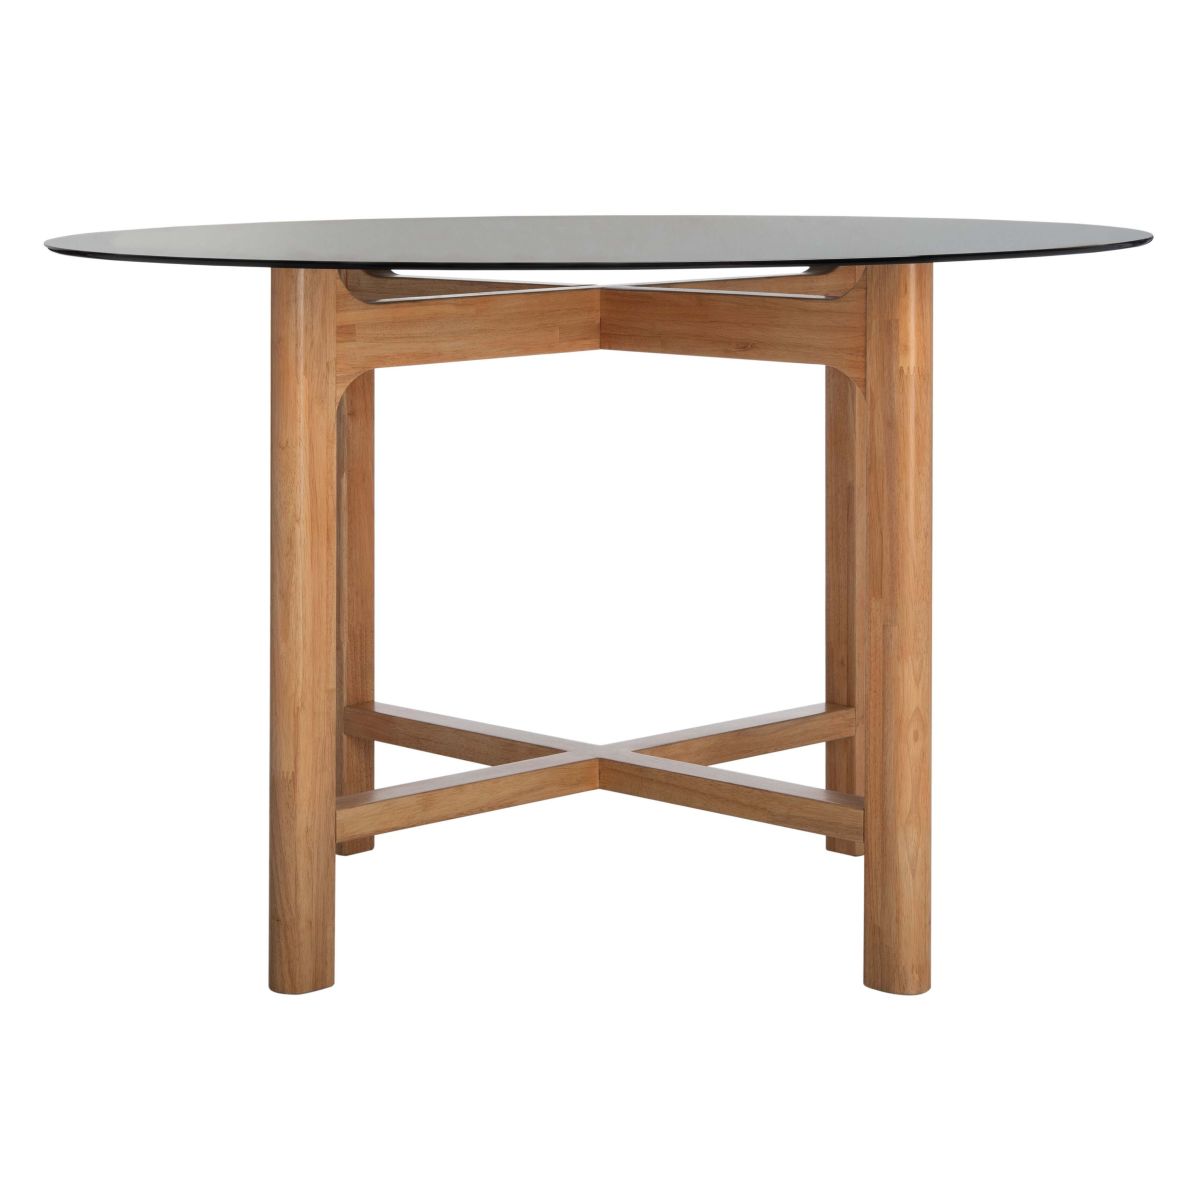 Safavieh Couture Ruthanne Round Glass Dining Table